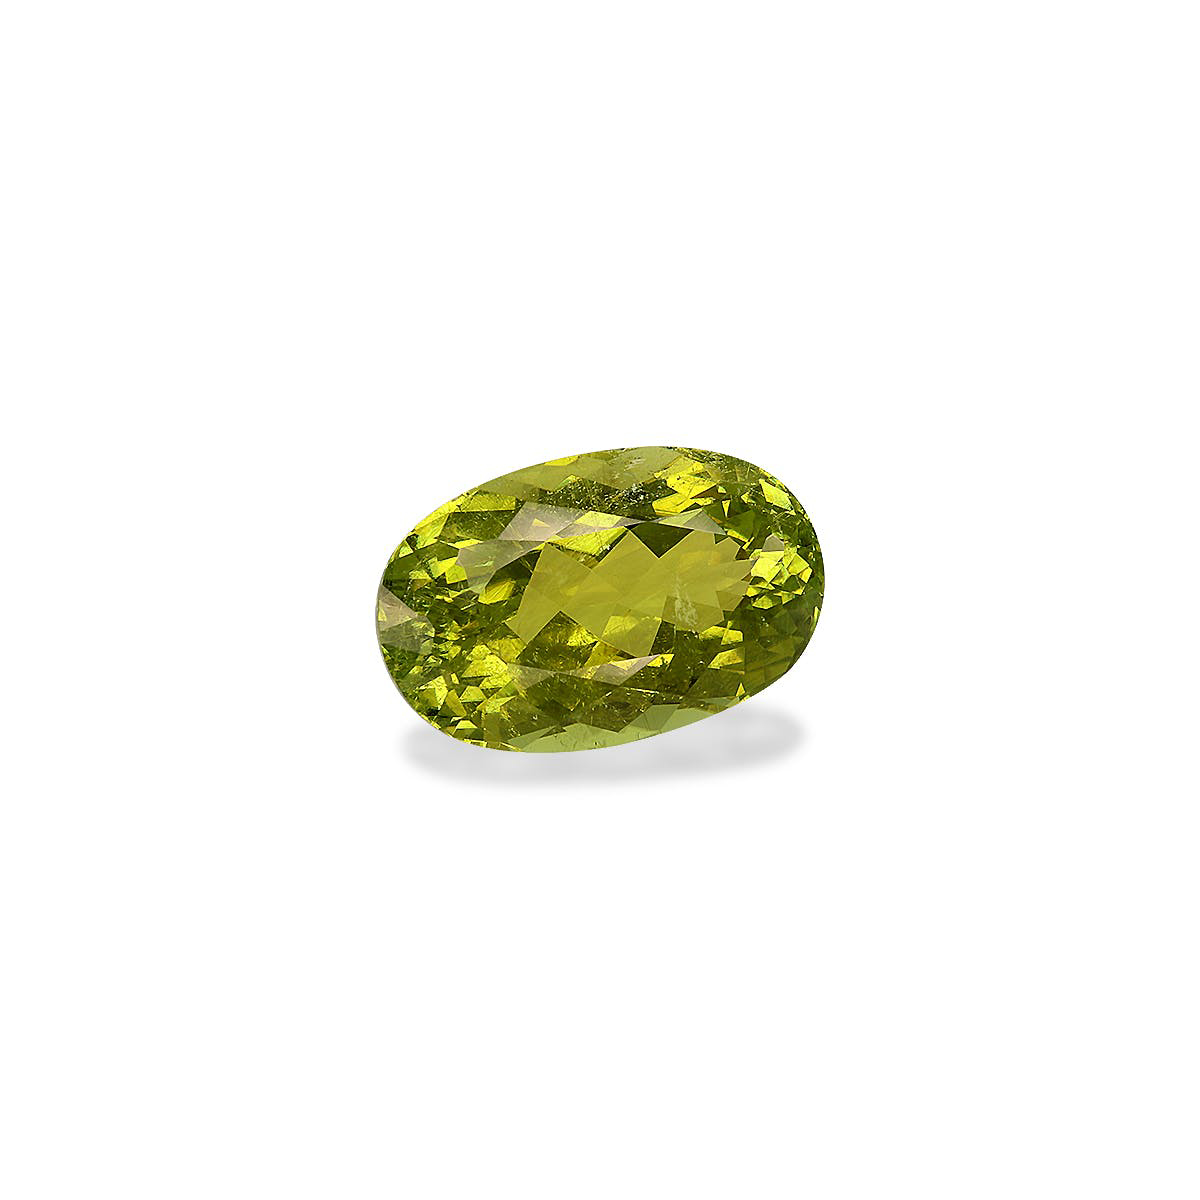 Picture of Olive Green Cuprian Tourmaline 11.04ct (MZ0302)